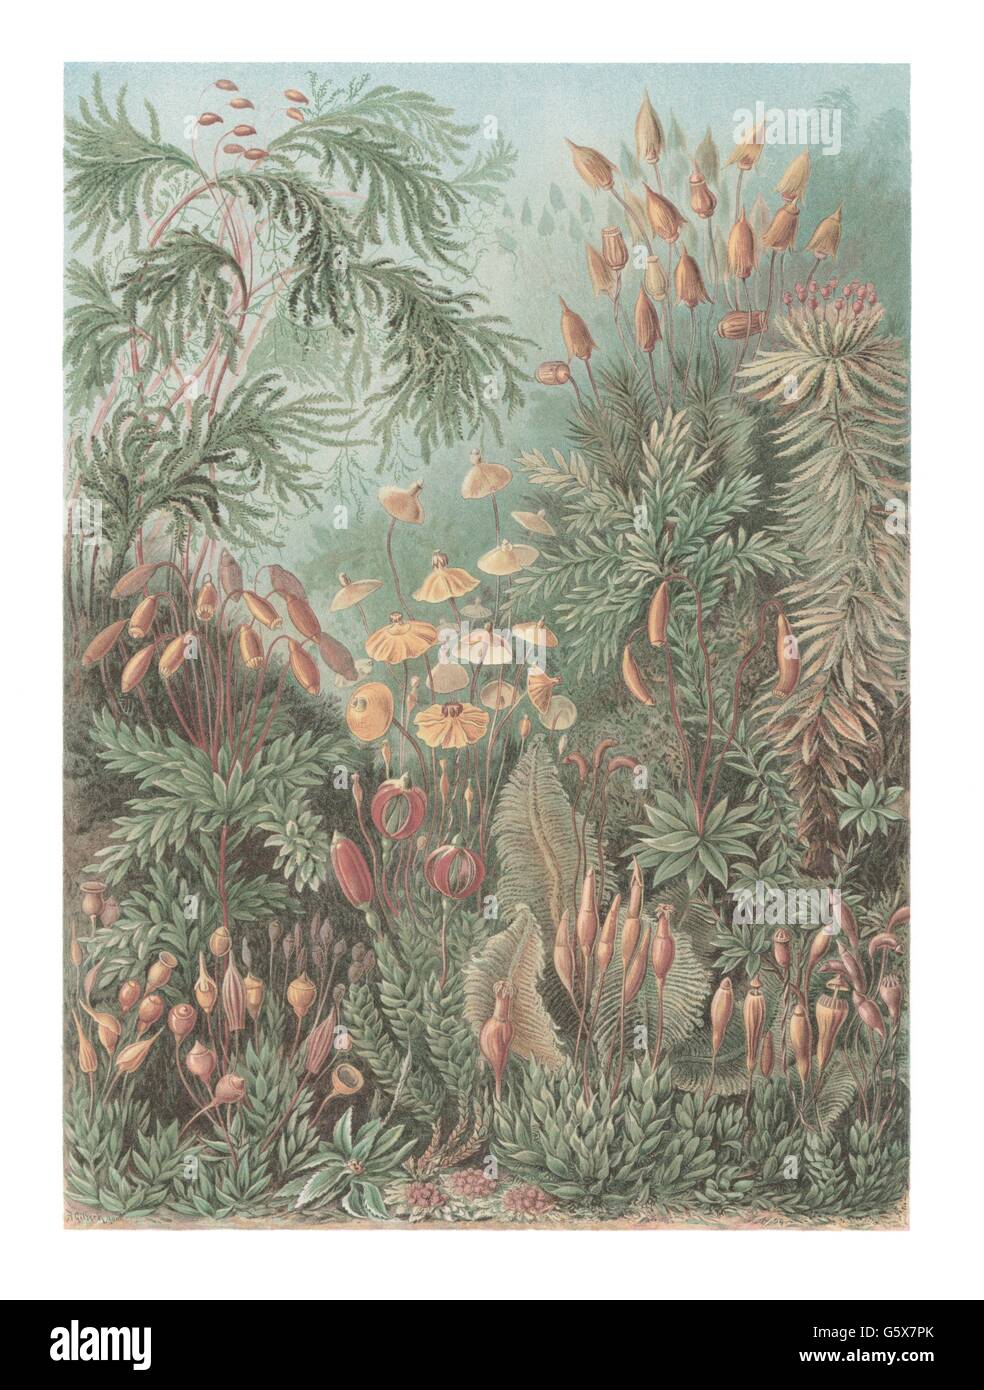 botany, mosses, bryophyta, colour lithograph, out of: Ernst Haeckel, 'Kunstformen der Natur', Leipzig - Vienna, 1899 - 1904, Additional-Rights-Clearences-Not Available Stock Photo